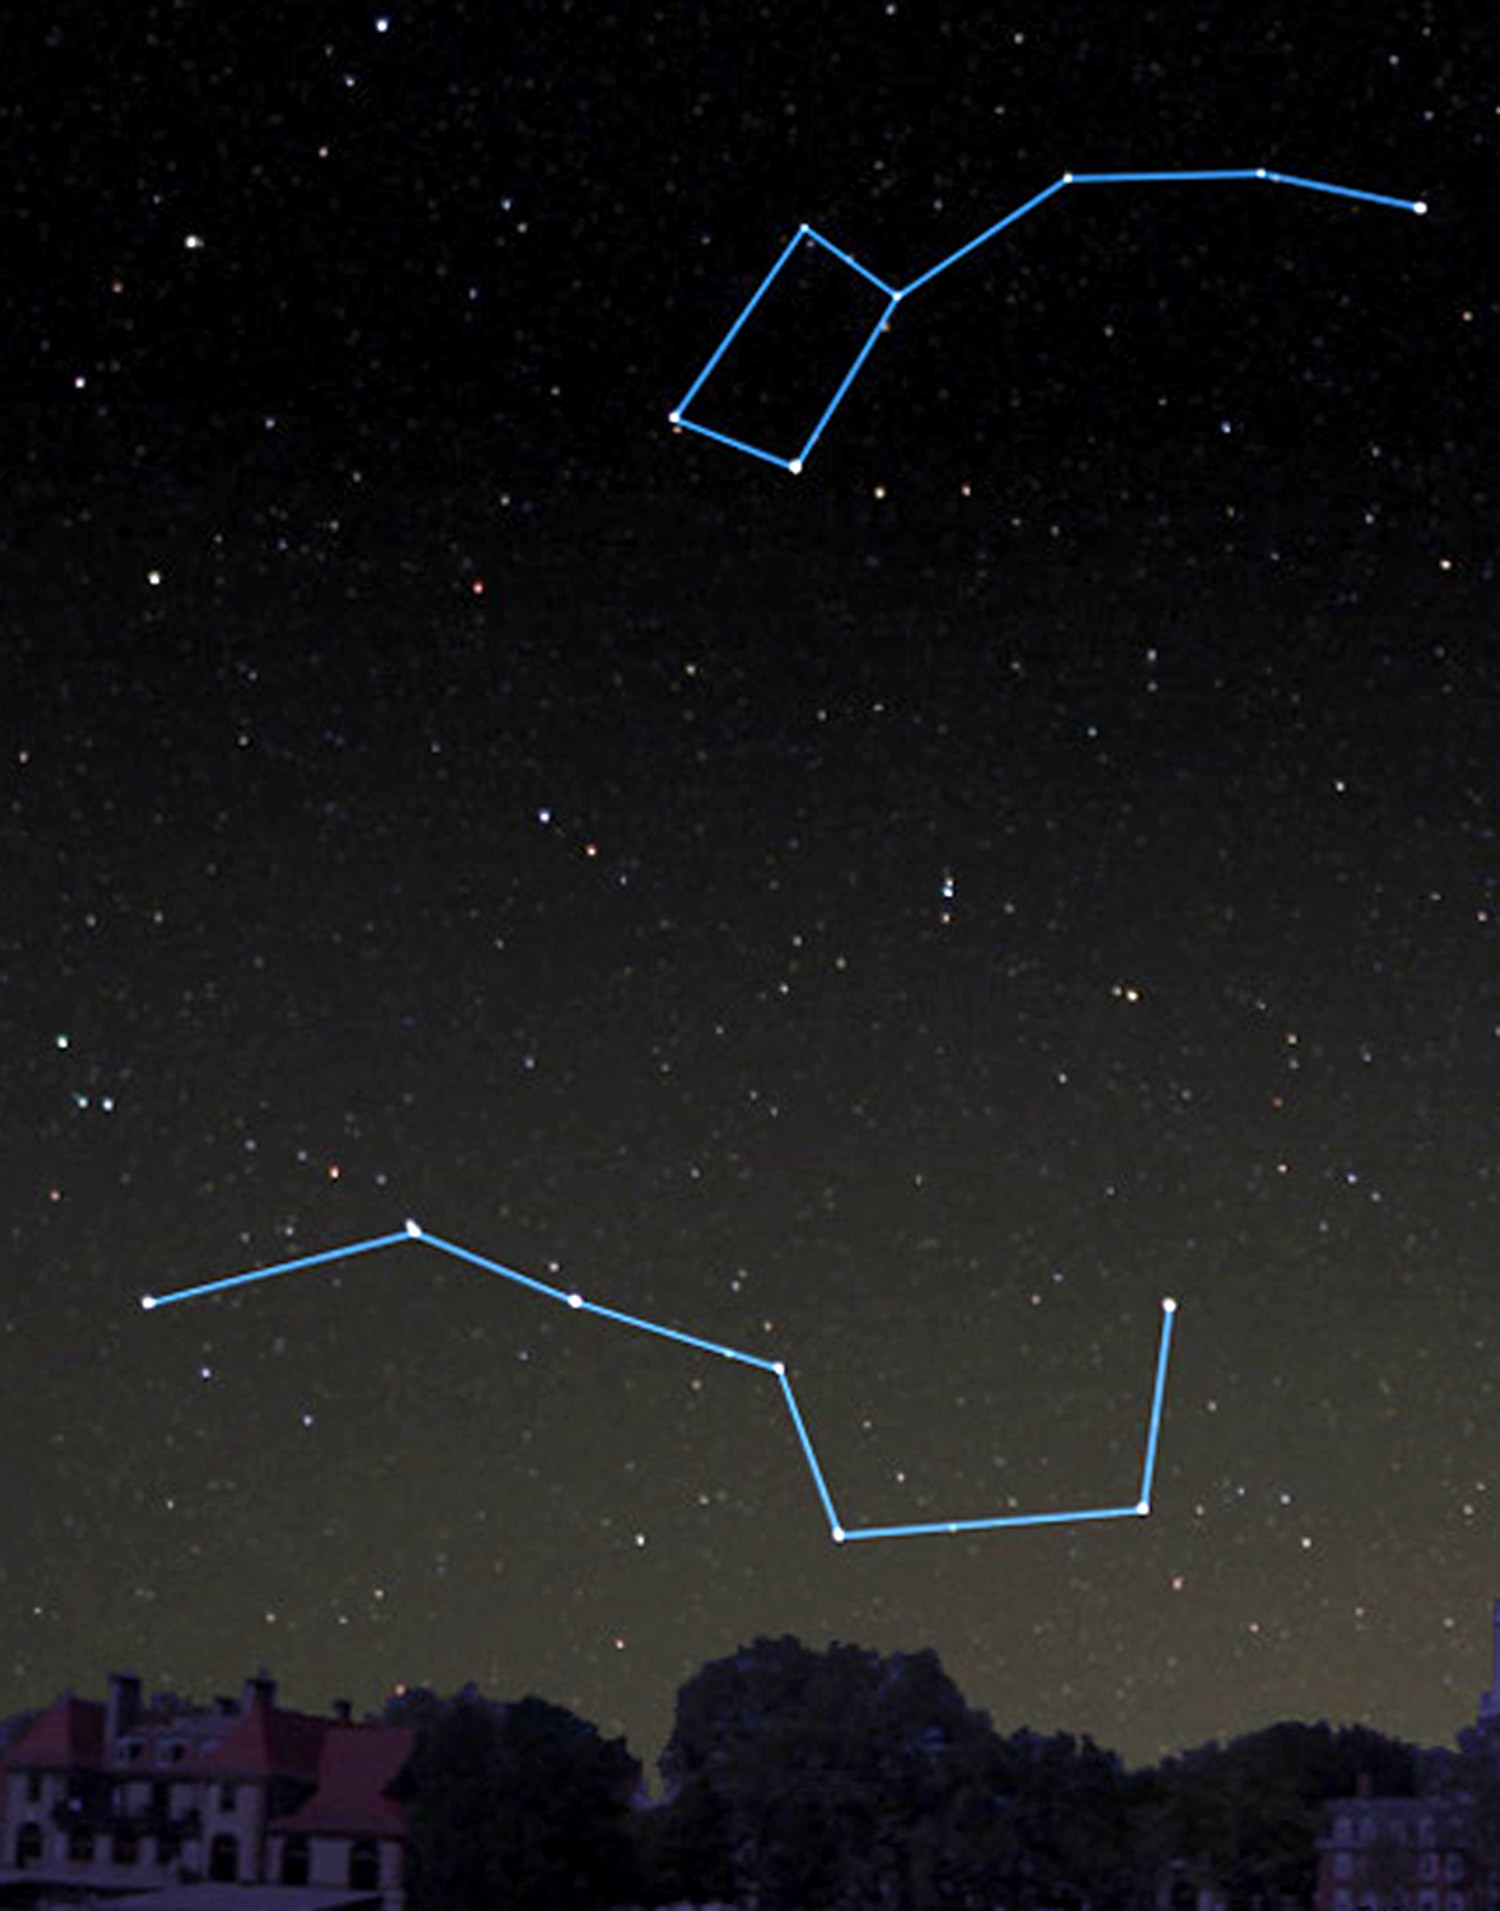 The Big and Little Dipper: How to find them